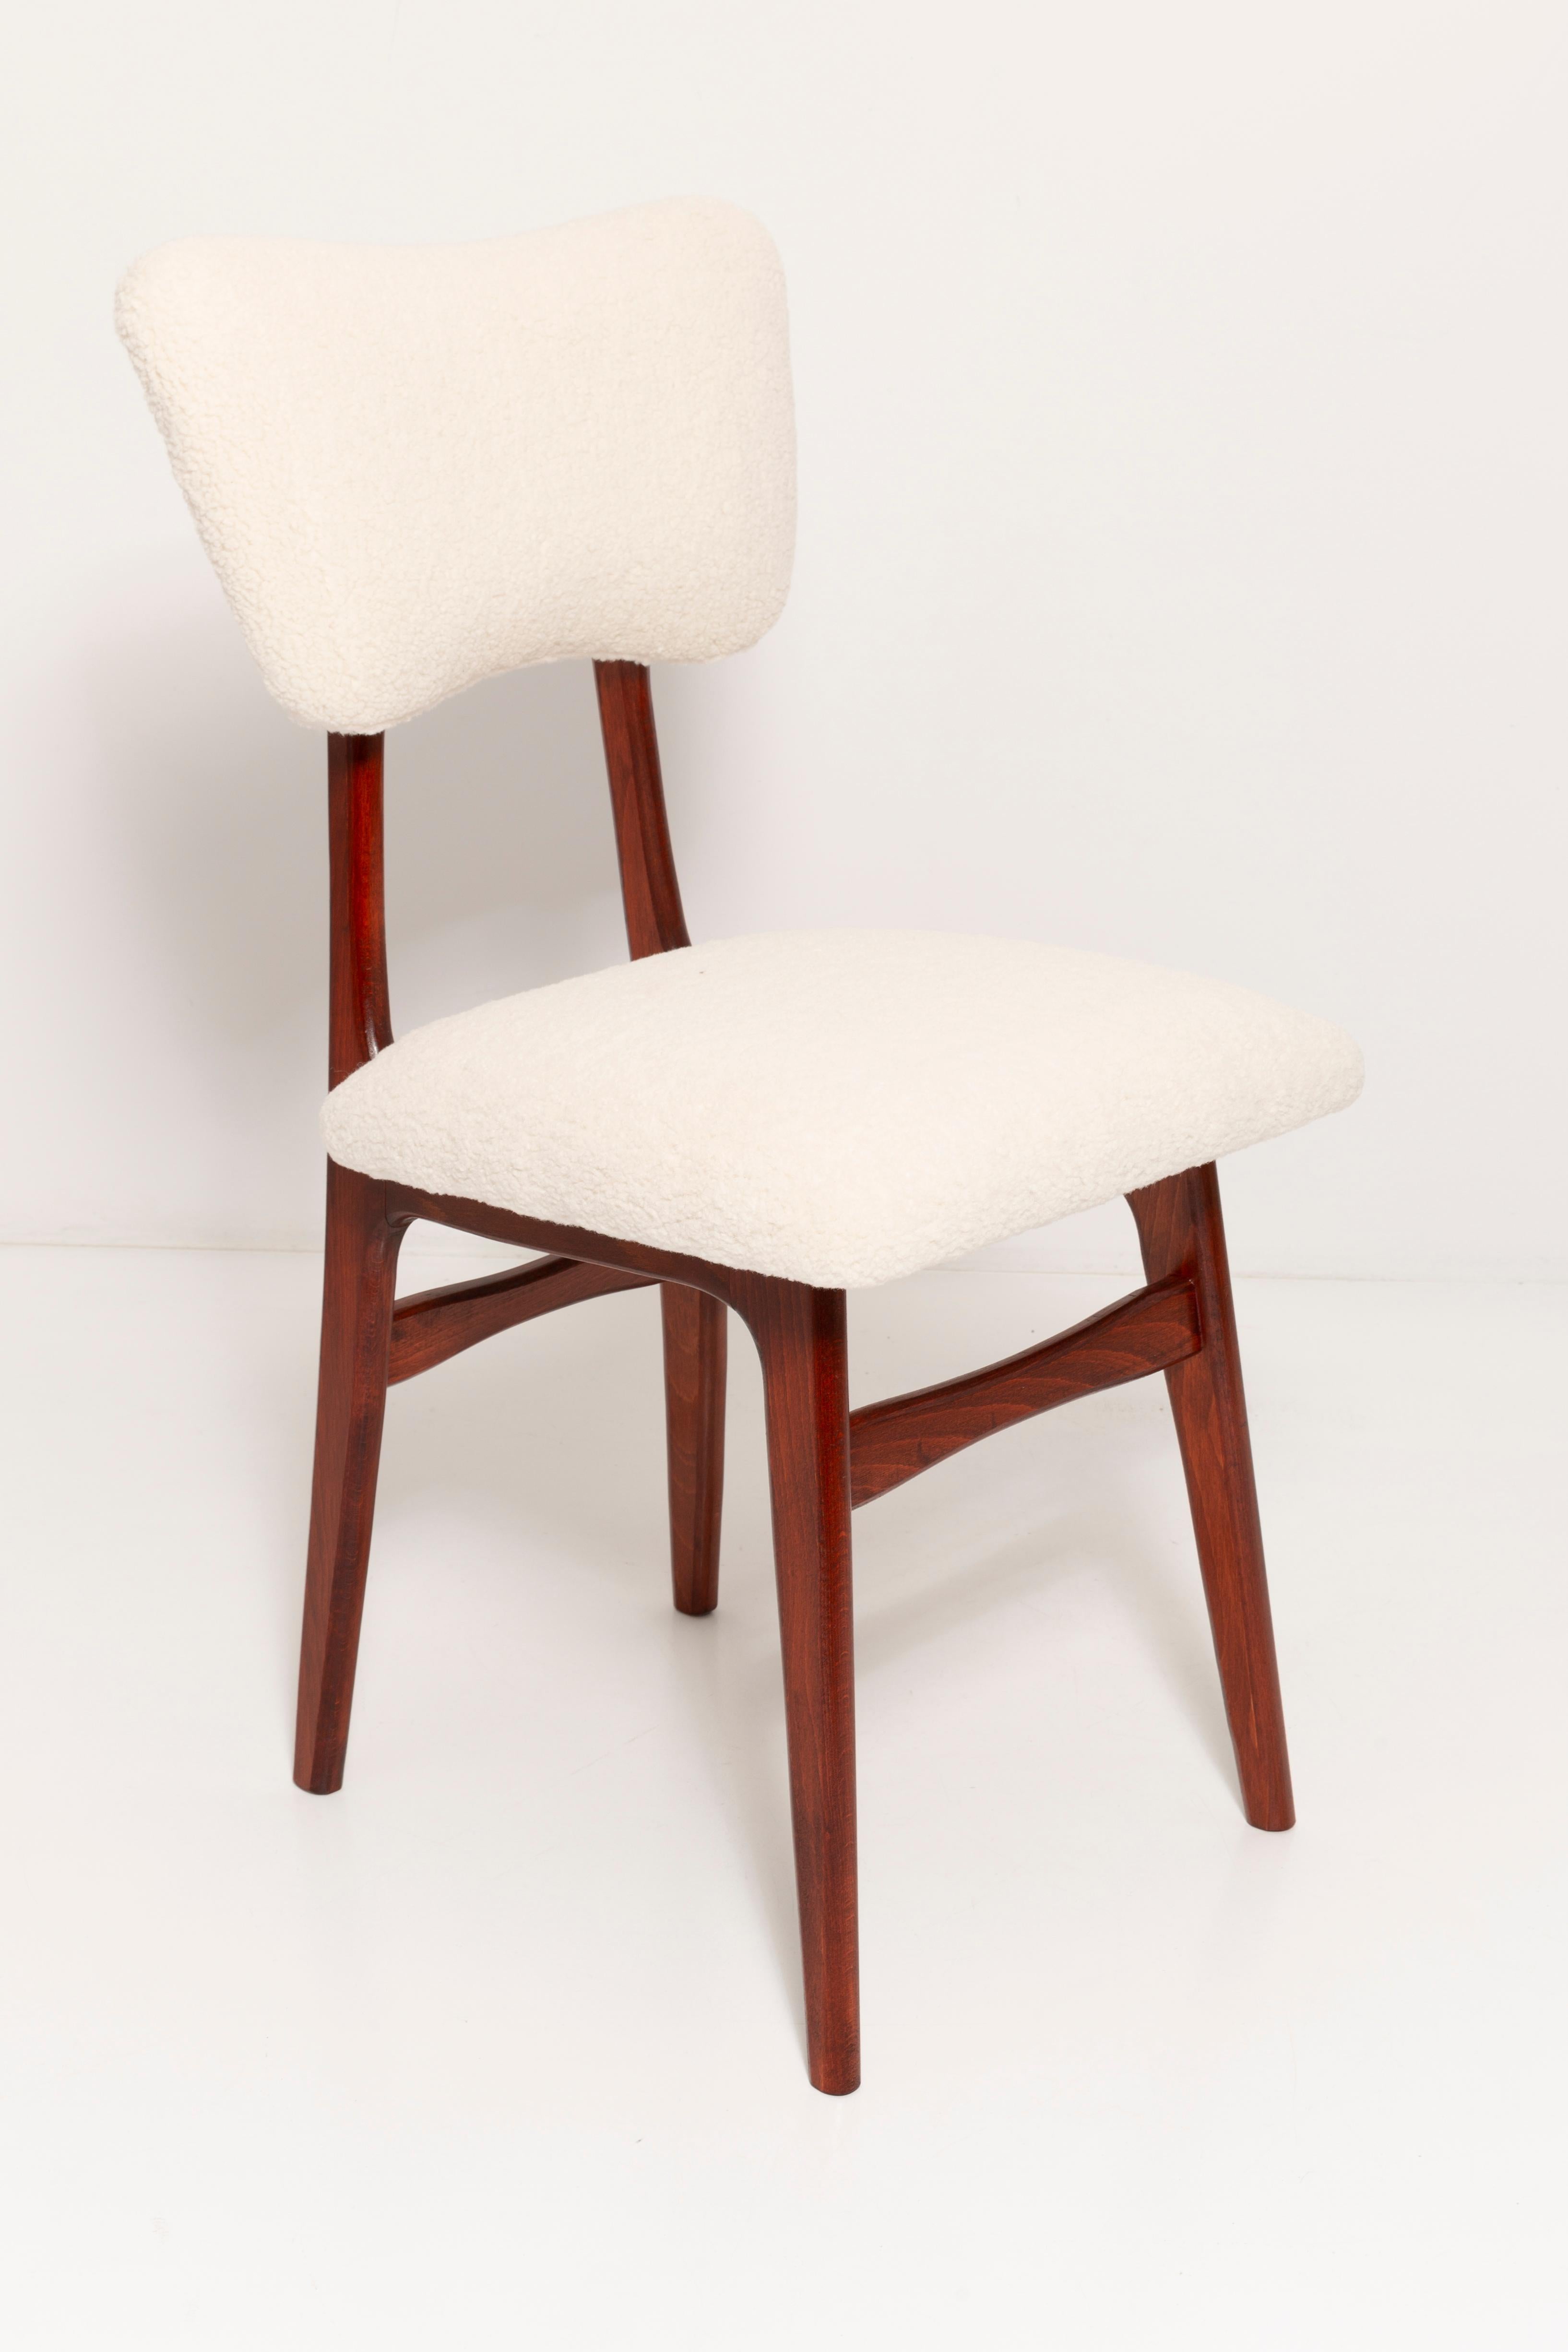 Chairs designed by Prof. Rajmund Halas. Made of beechwood. Chairs are after a complete upholstery renovation; the woodwork has been refreshed and painted in cherry color lacquer. Seat and back is dressed in light boucle, durable and pleasant to the